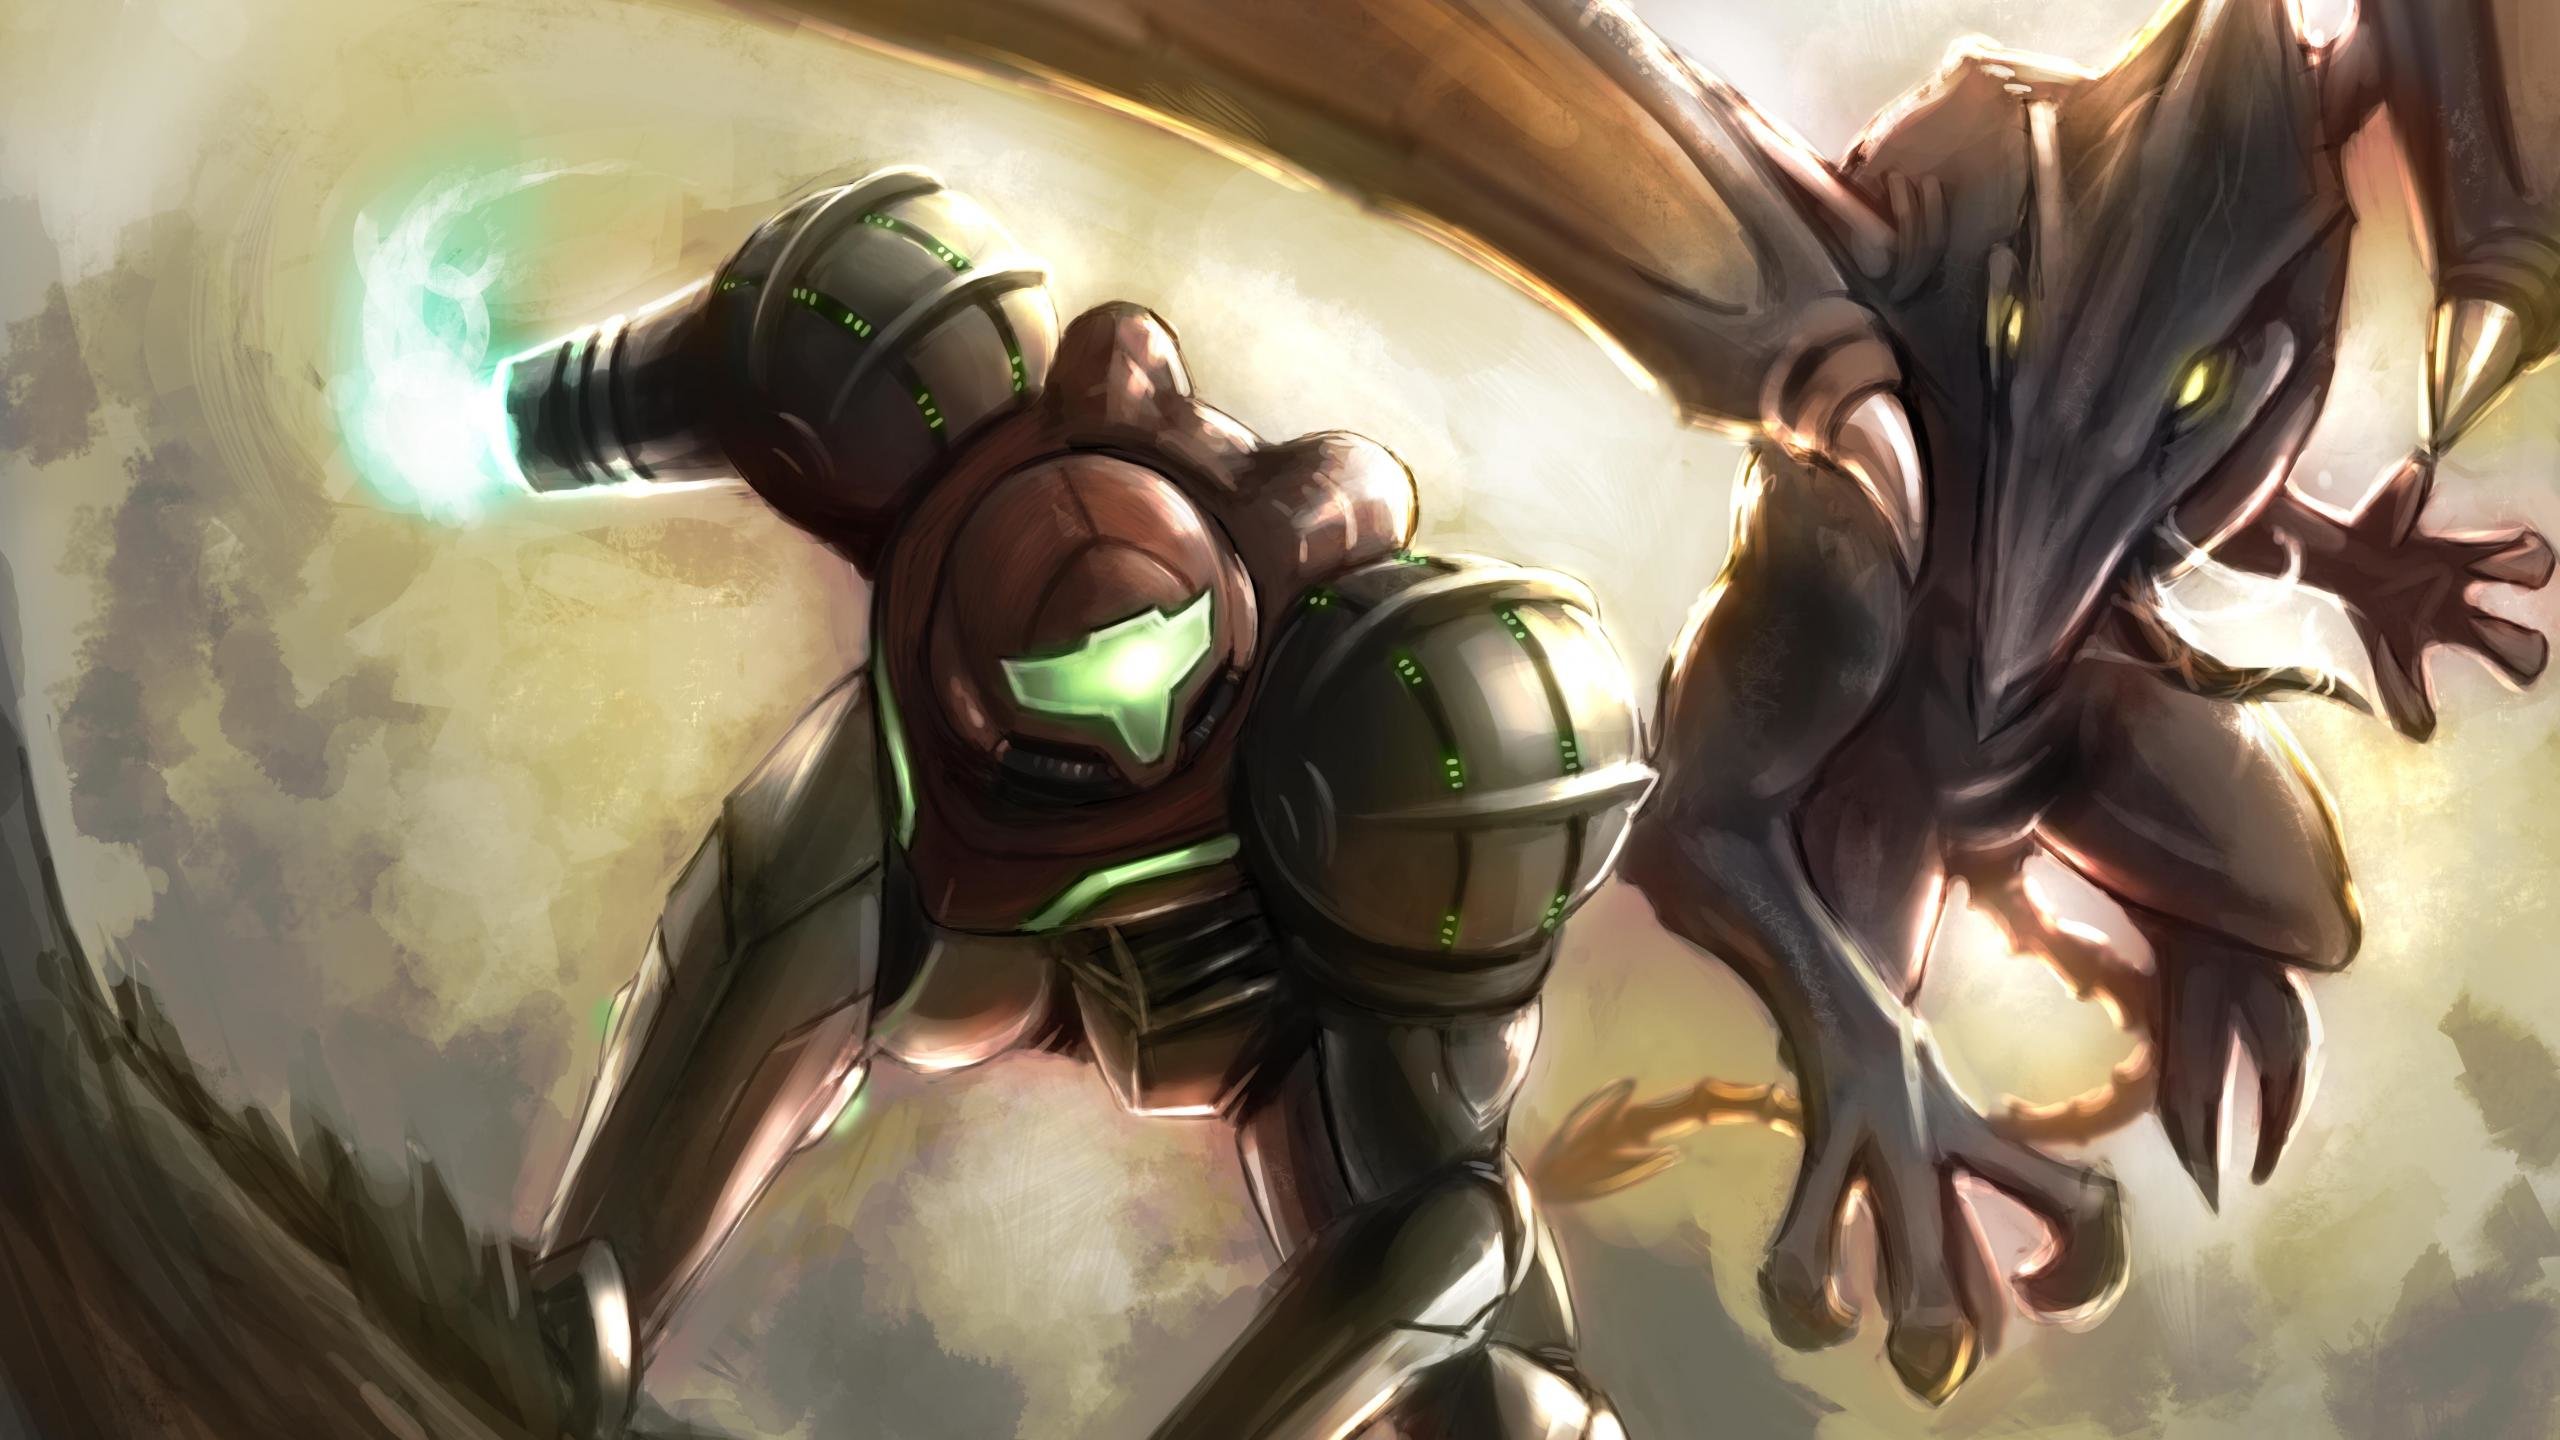 Download hd 2560x1440 Metroid desktop background ID:405518 for free